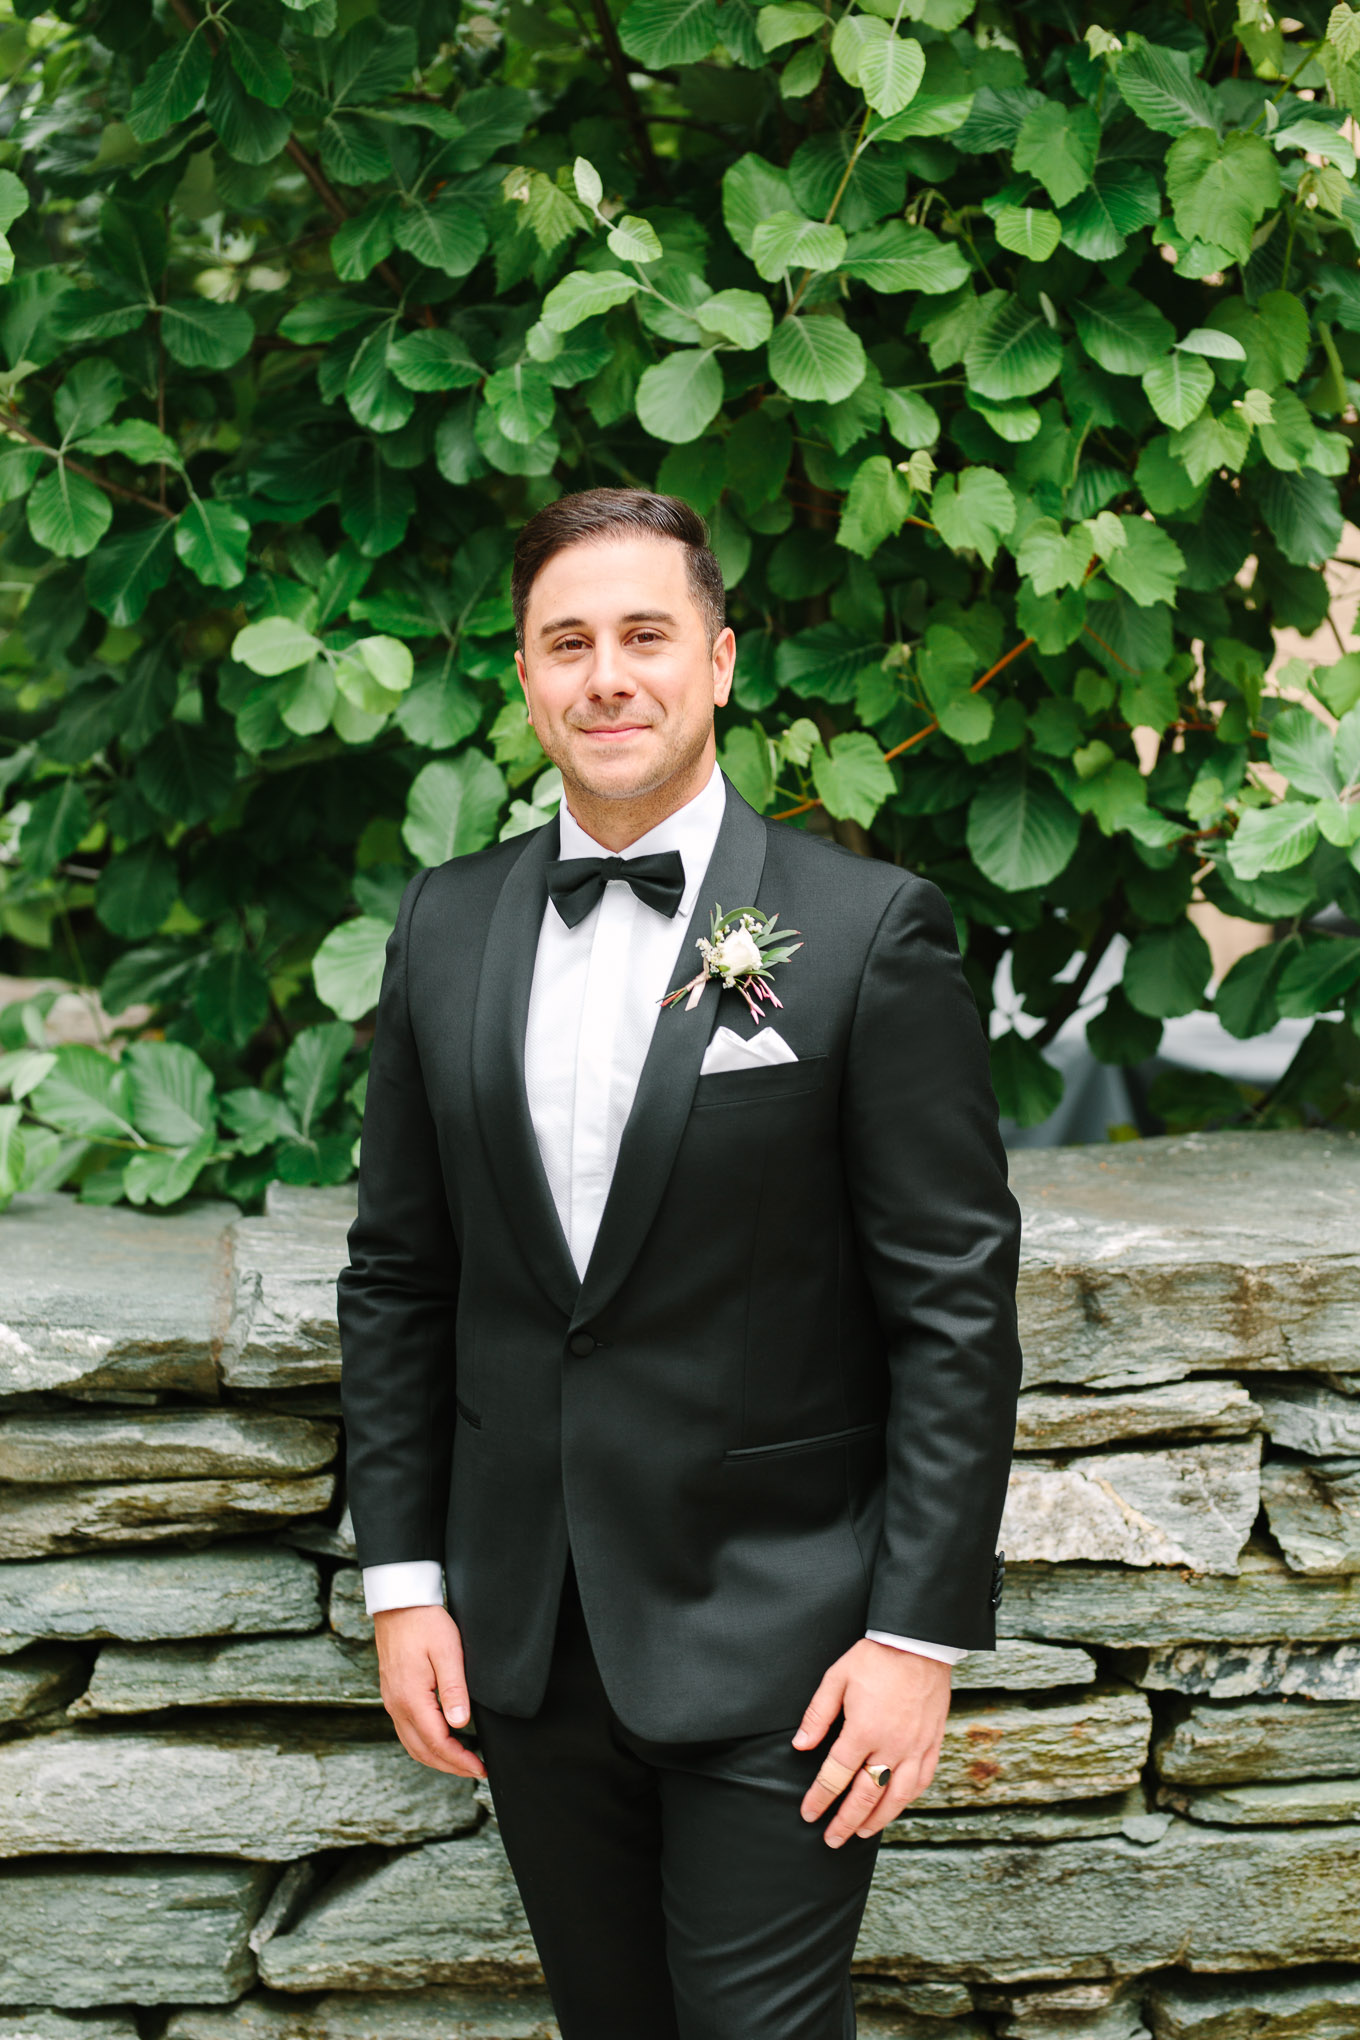 Groom in classic black tuxedo at Millbrook Resort Queenstown New Zealand wedding by Mary Costa Photography | www.marycostaweddings.com